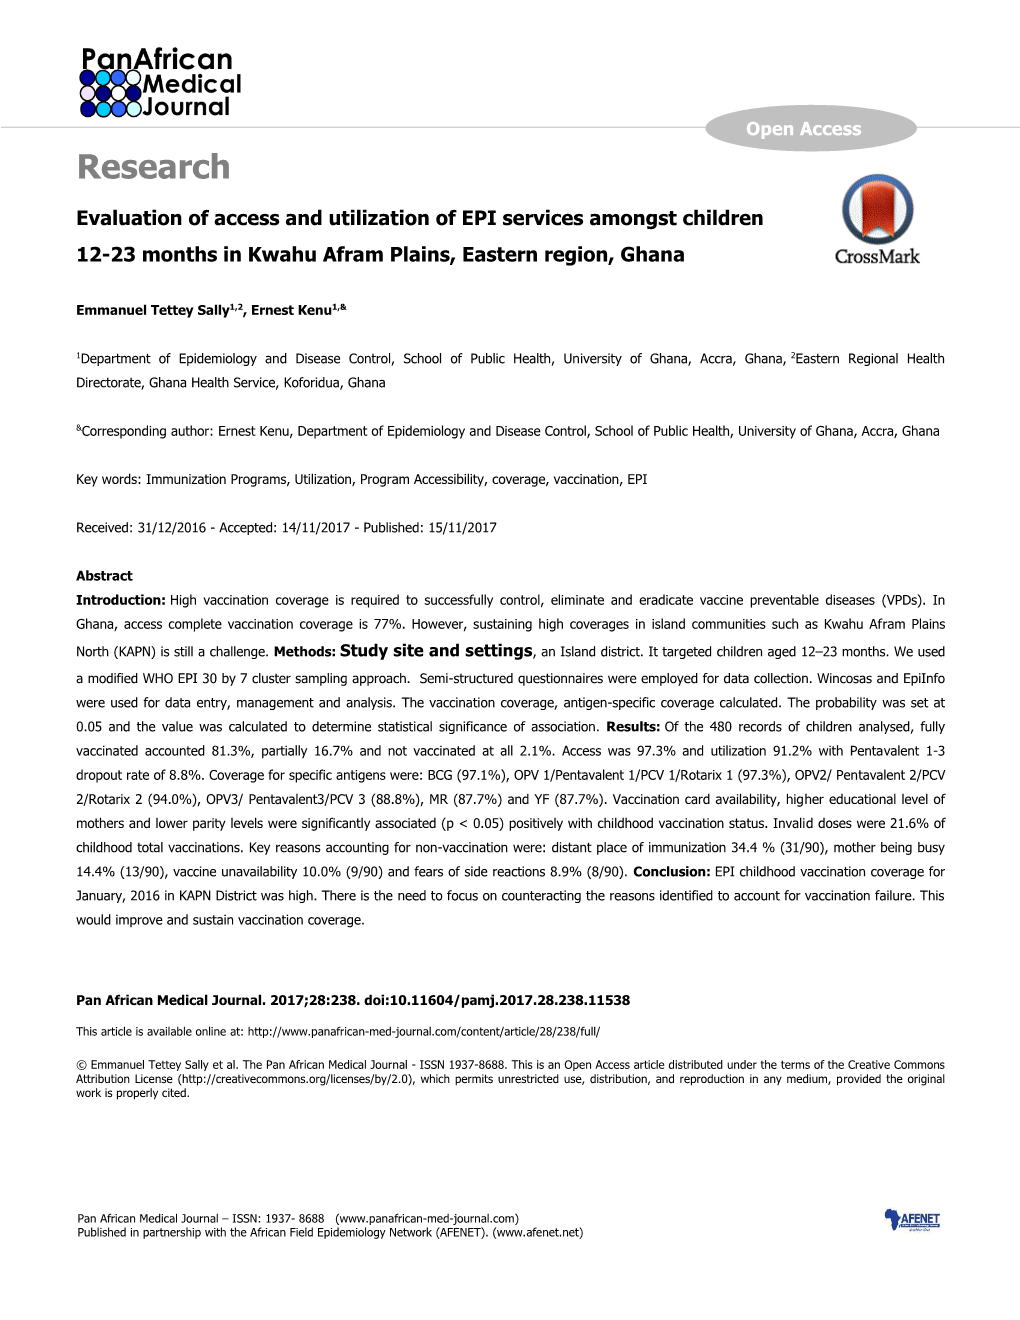 Research Evaluation of Access and Utilization of EPI Services Amongst Children 12-23 Months in Kwahu Afram Plains, Eastern Region, Ghana